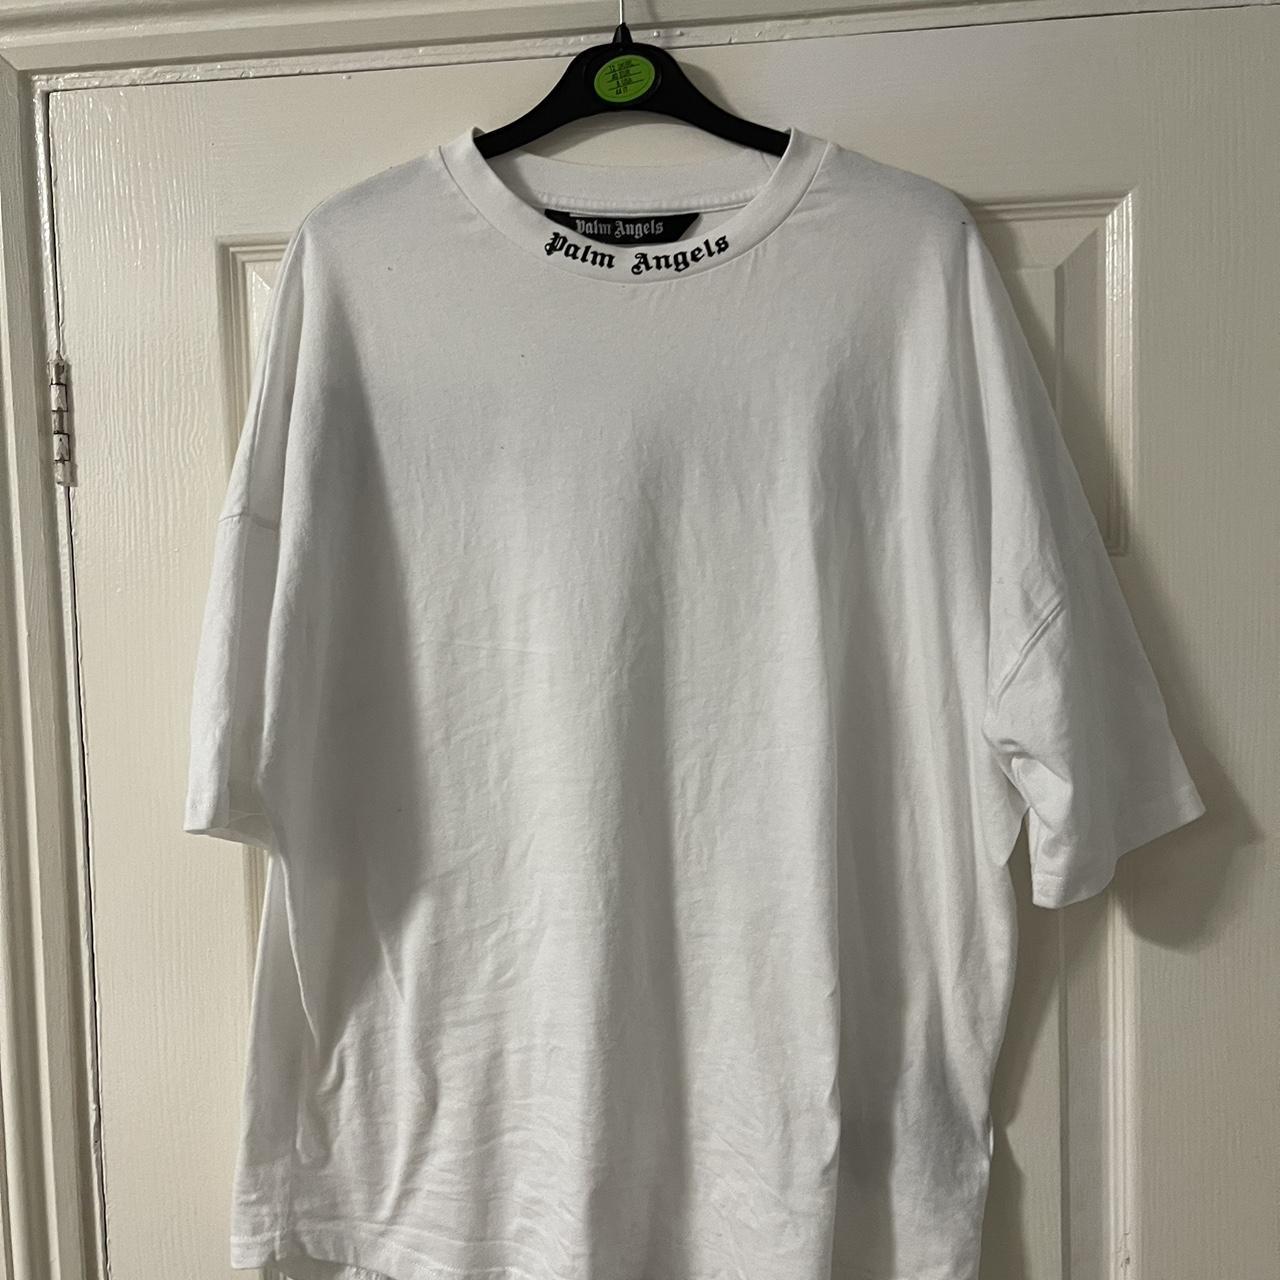 White palm angles top - Depop